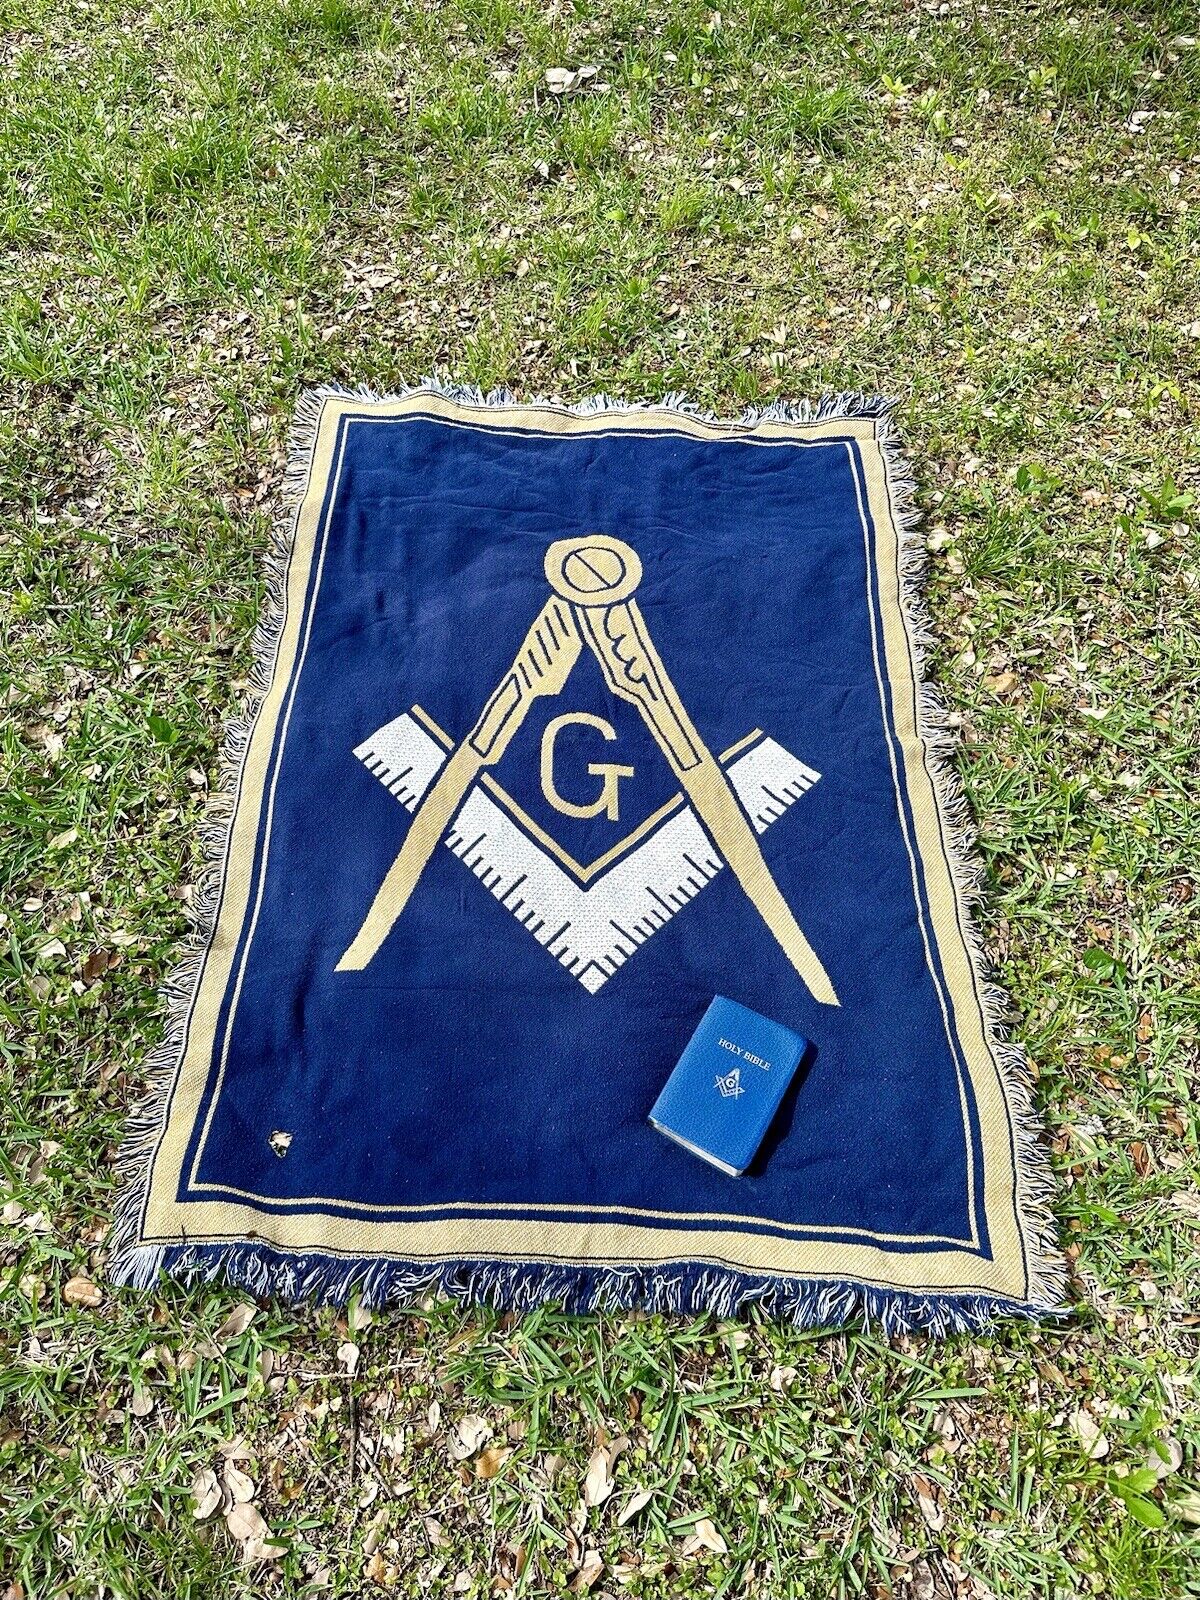 Vintage Freemason Masonic Blanket RUG 69 x 49” & Book Authentic Official Issued